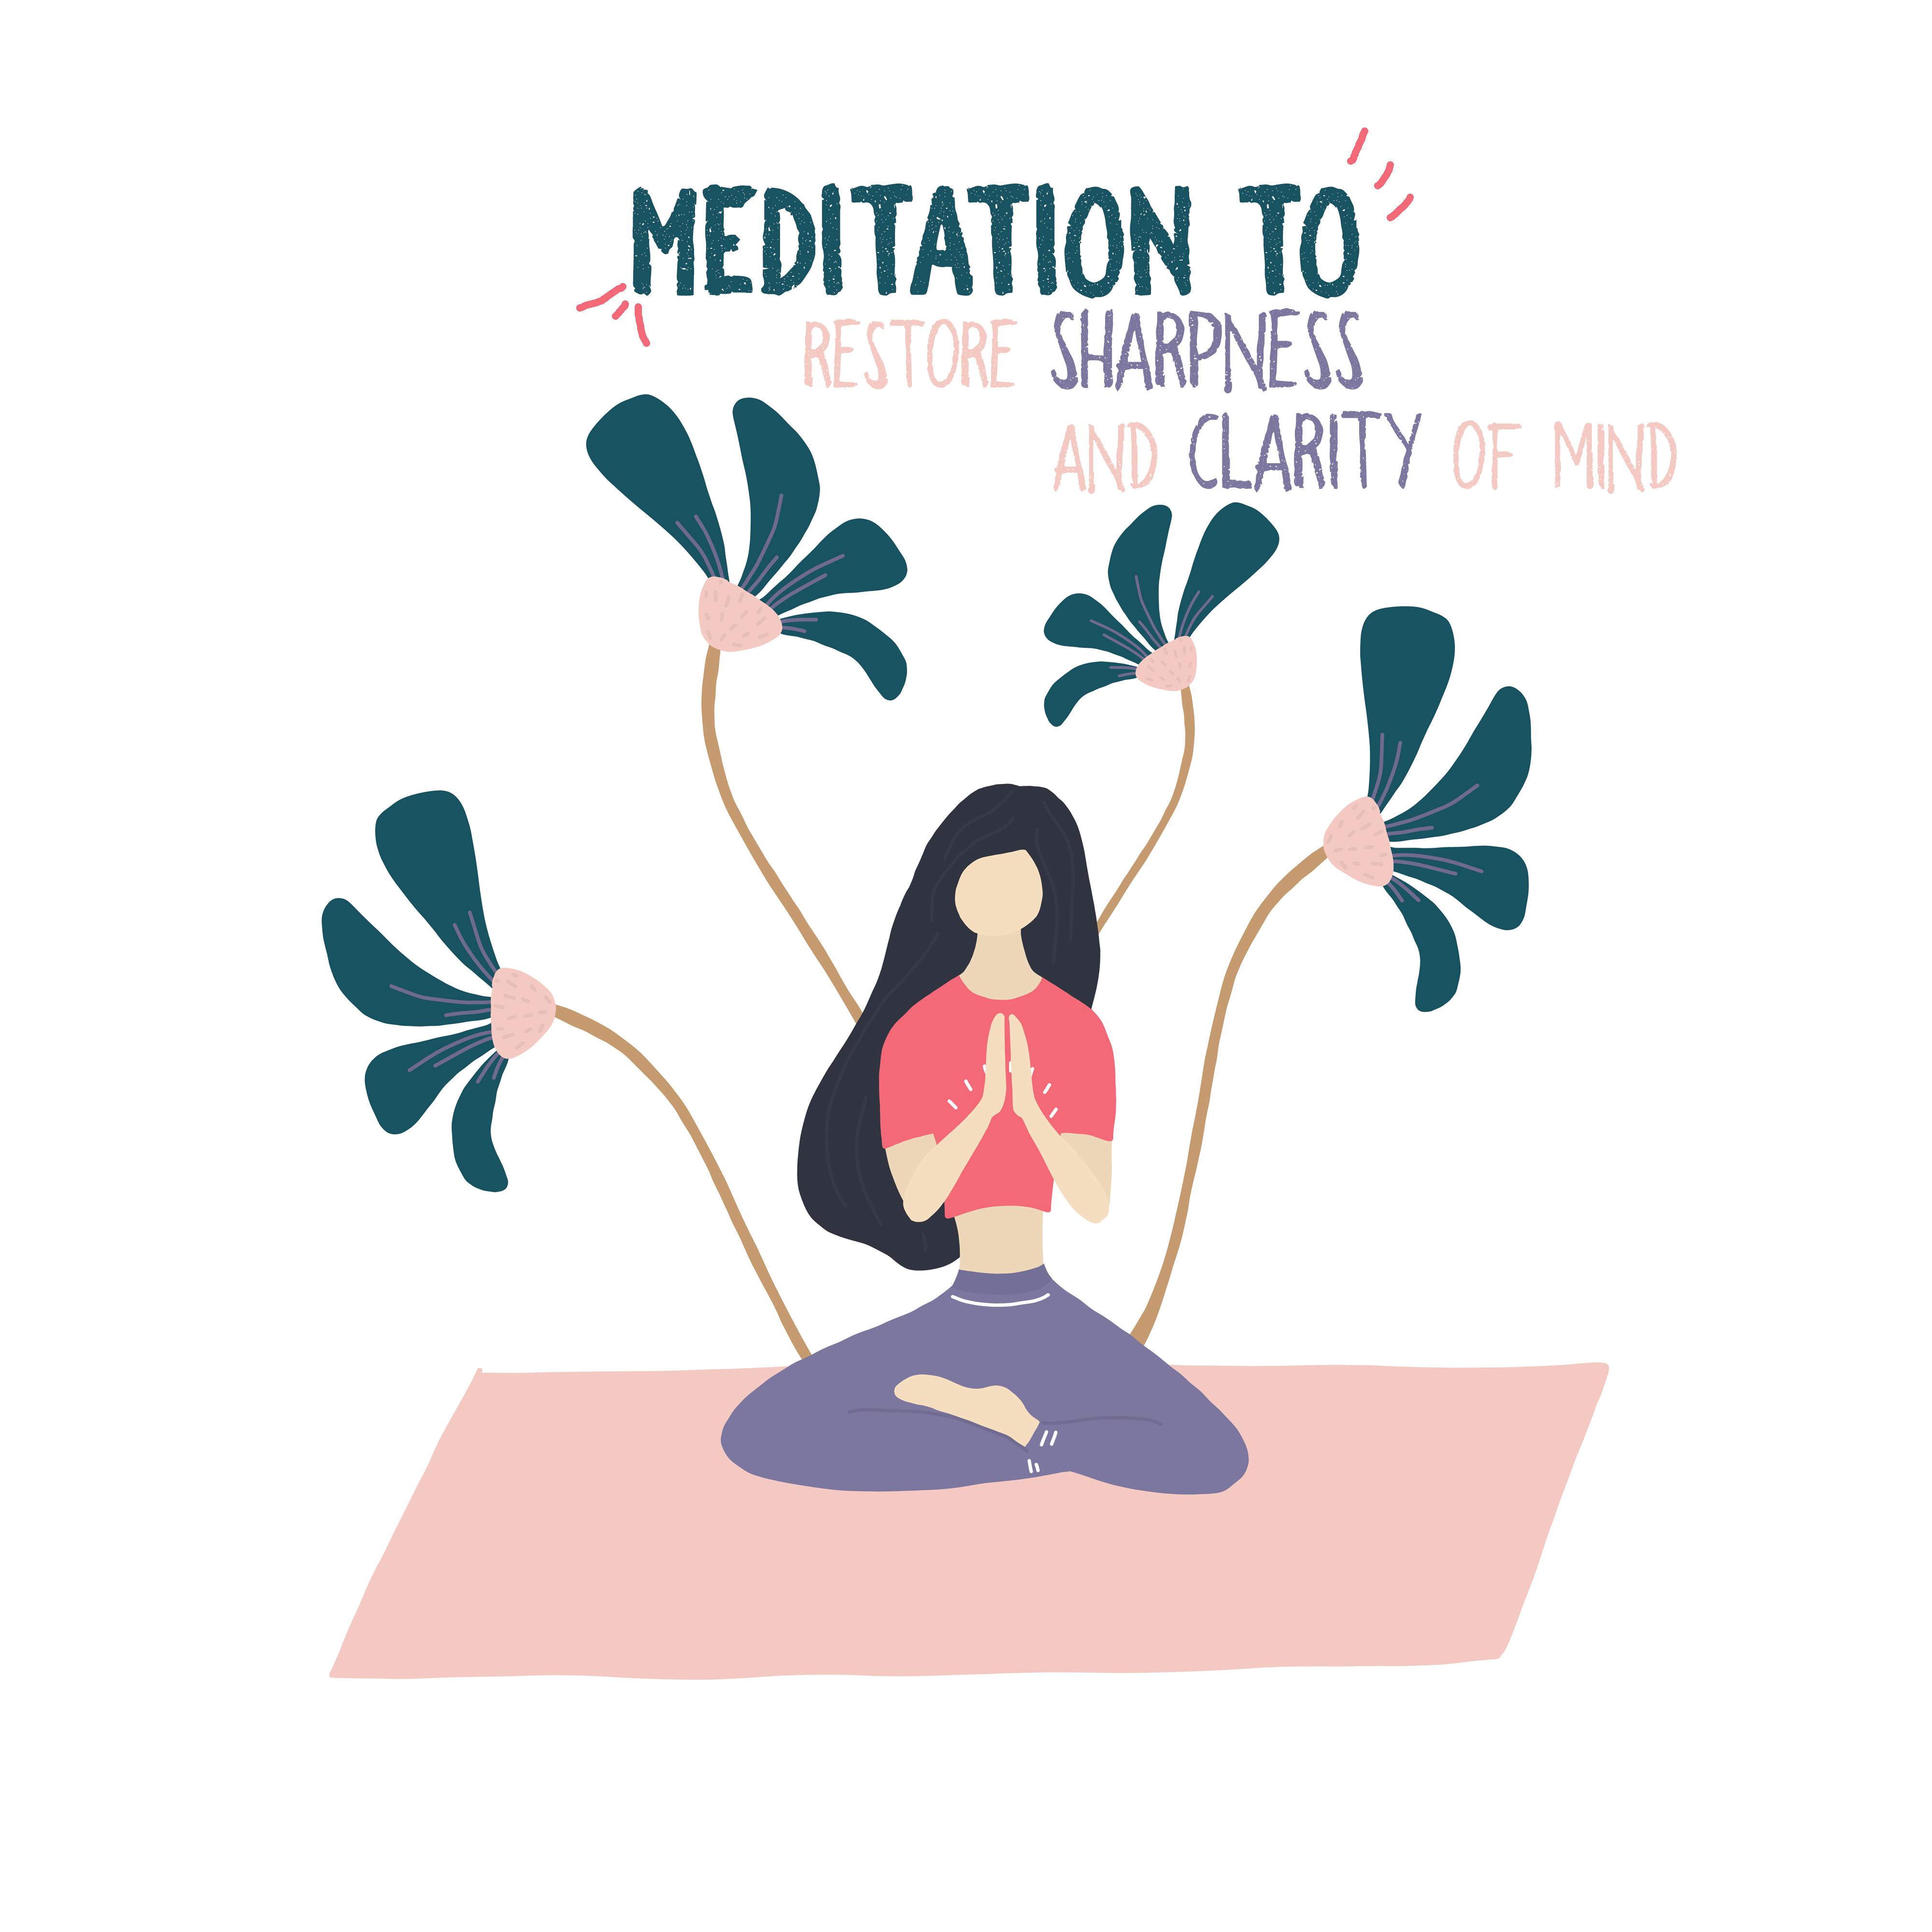 Meditation to Restore Sharpness and Clarity of Mind